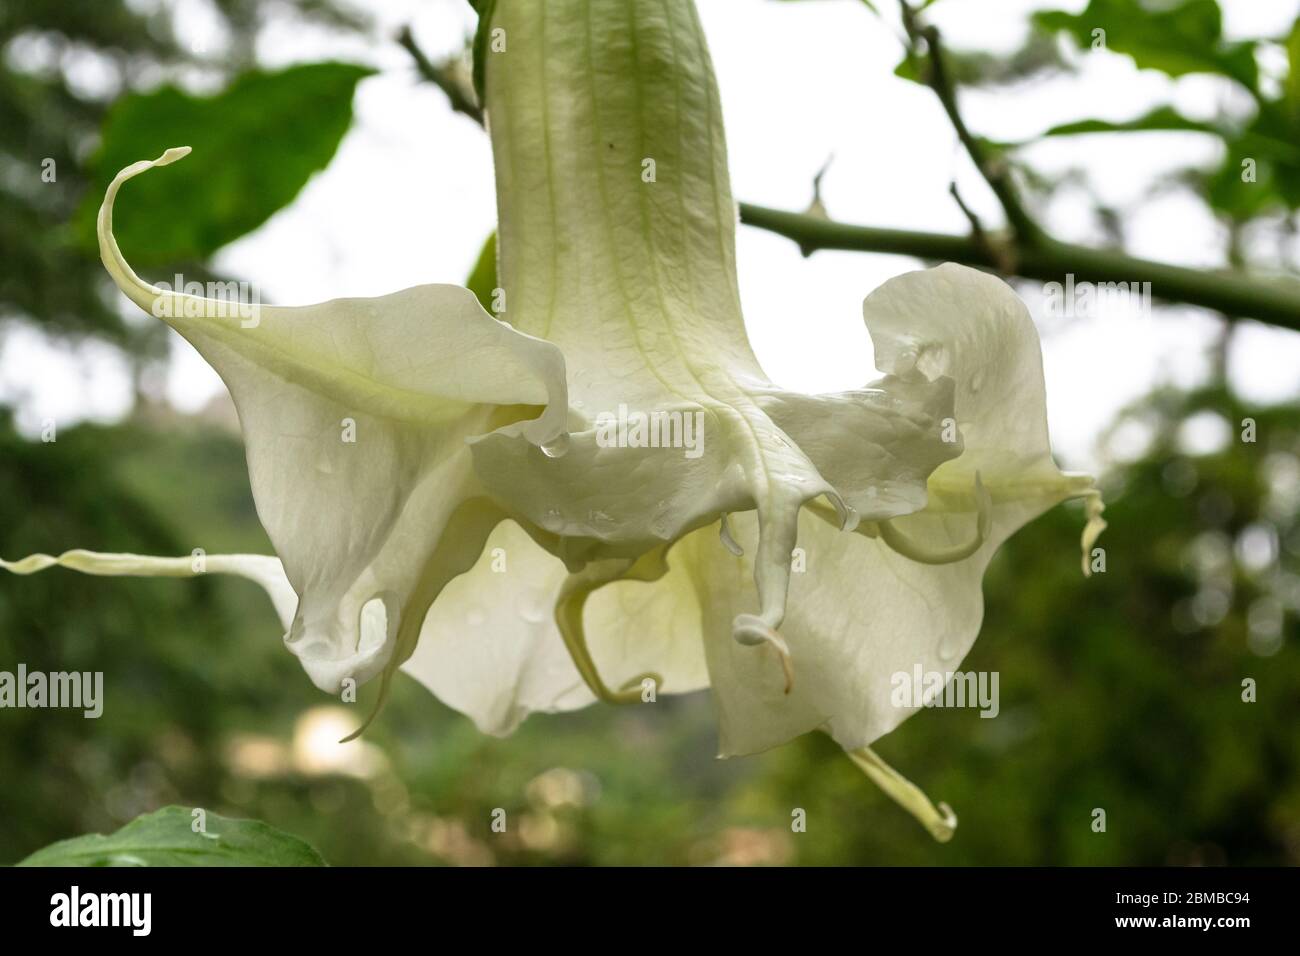 Close up shot of a white brugmansia flower, a beautiful ornamental plant from south america naturalized in Europe Stock Photo